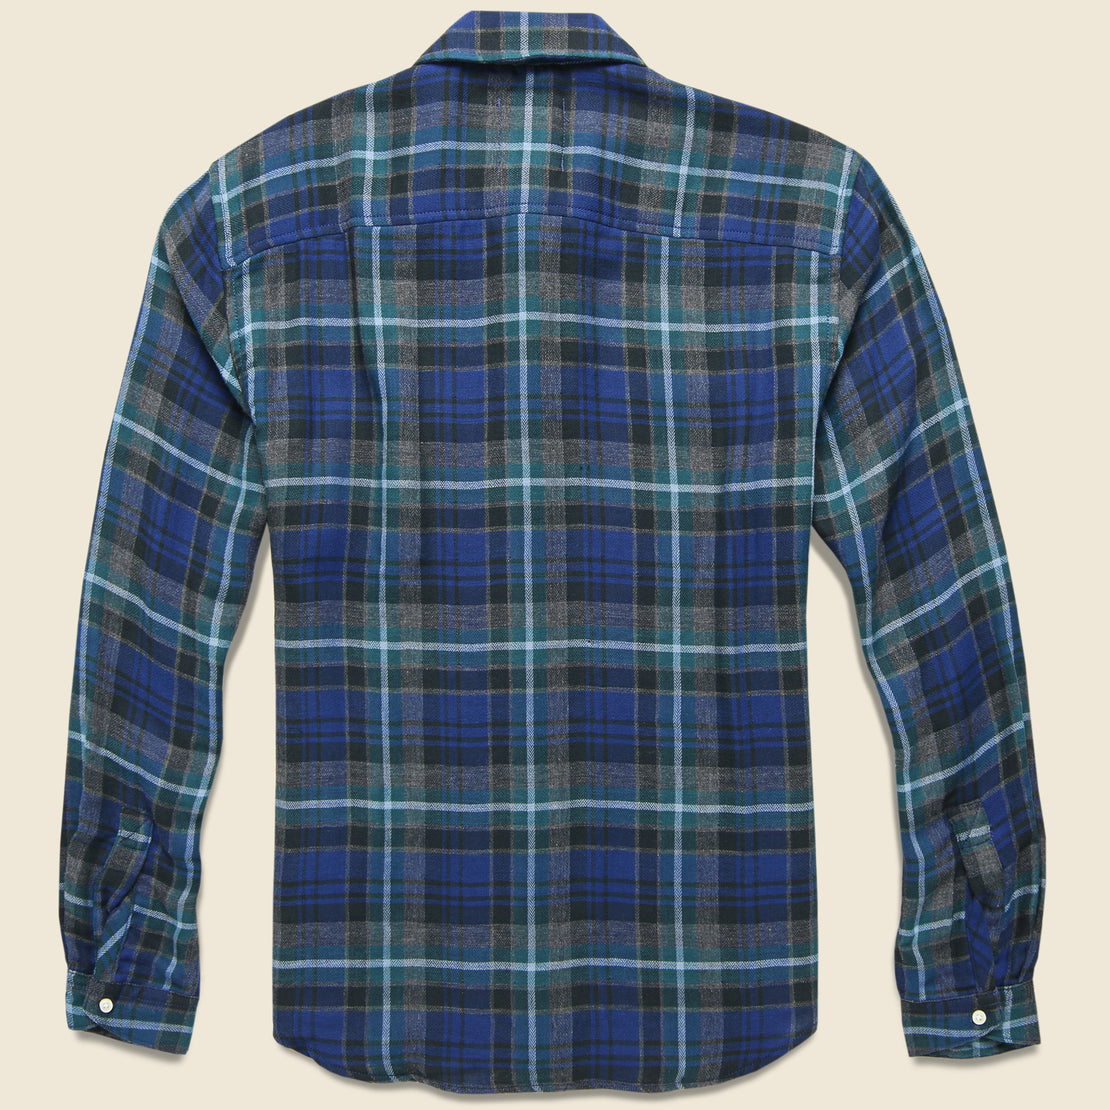 Aurora Shirt - Midnight - Life After Denim - STAG Provisions - Tops - L/S Woven - Plaid